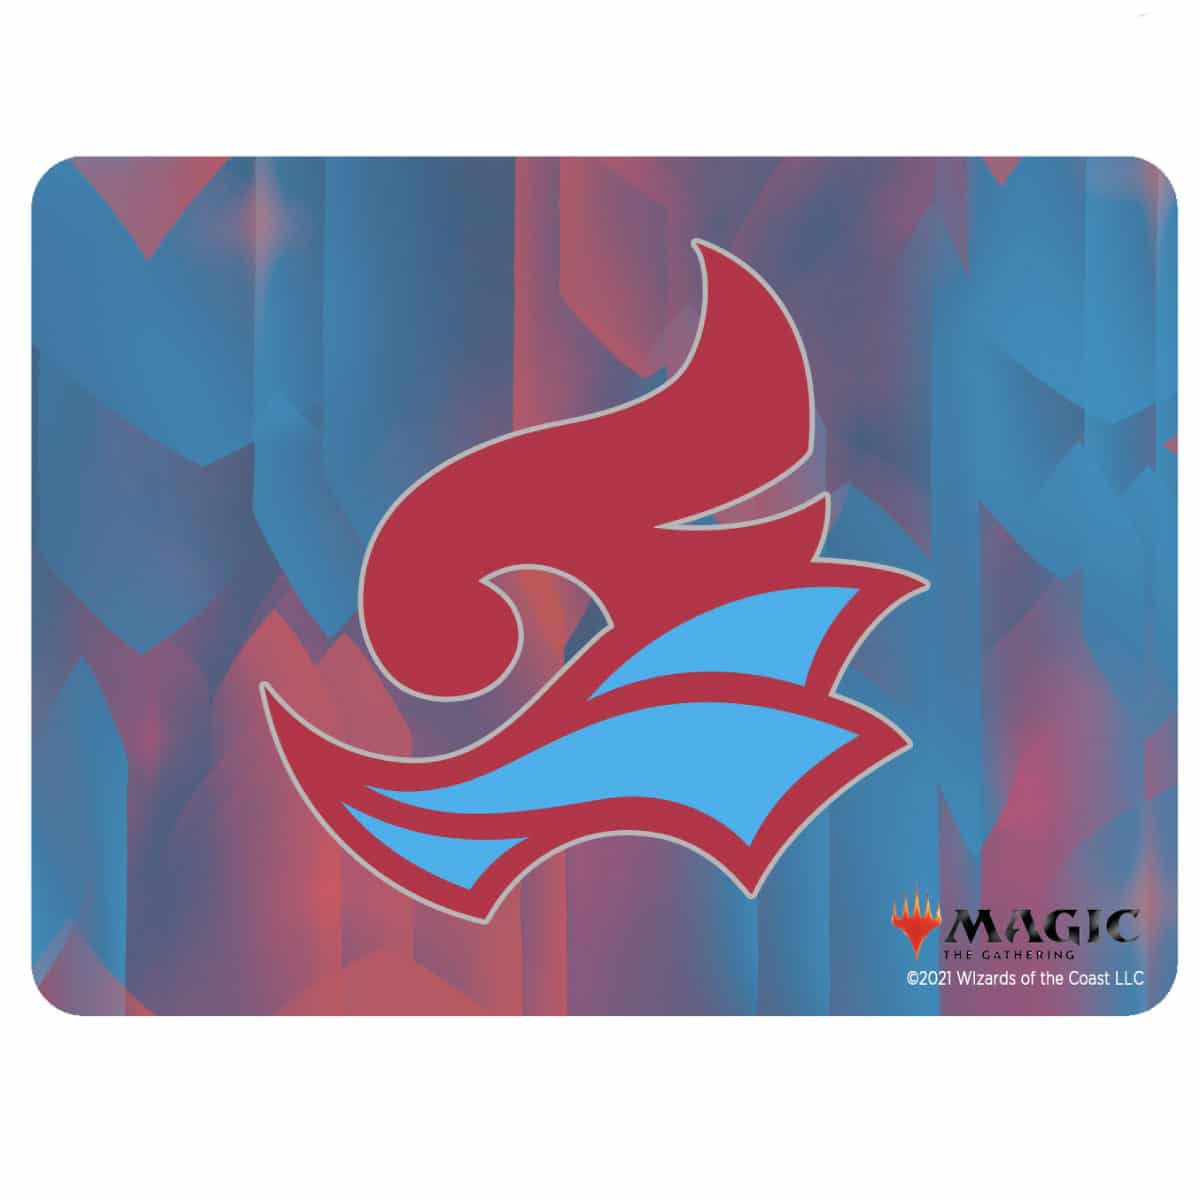 Strixhaven Mousepad for Magic: The Gathering